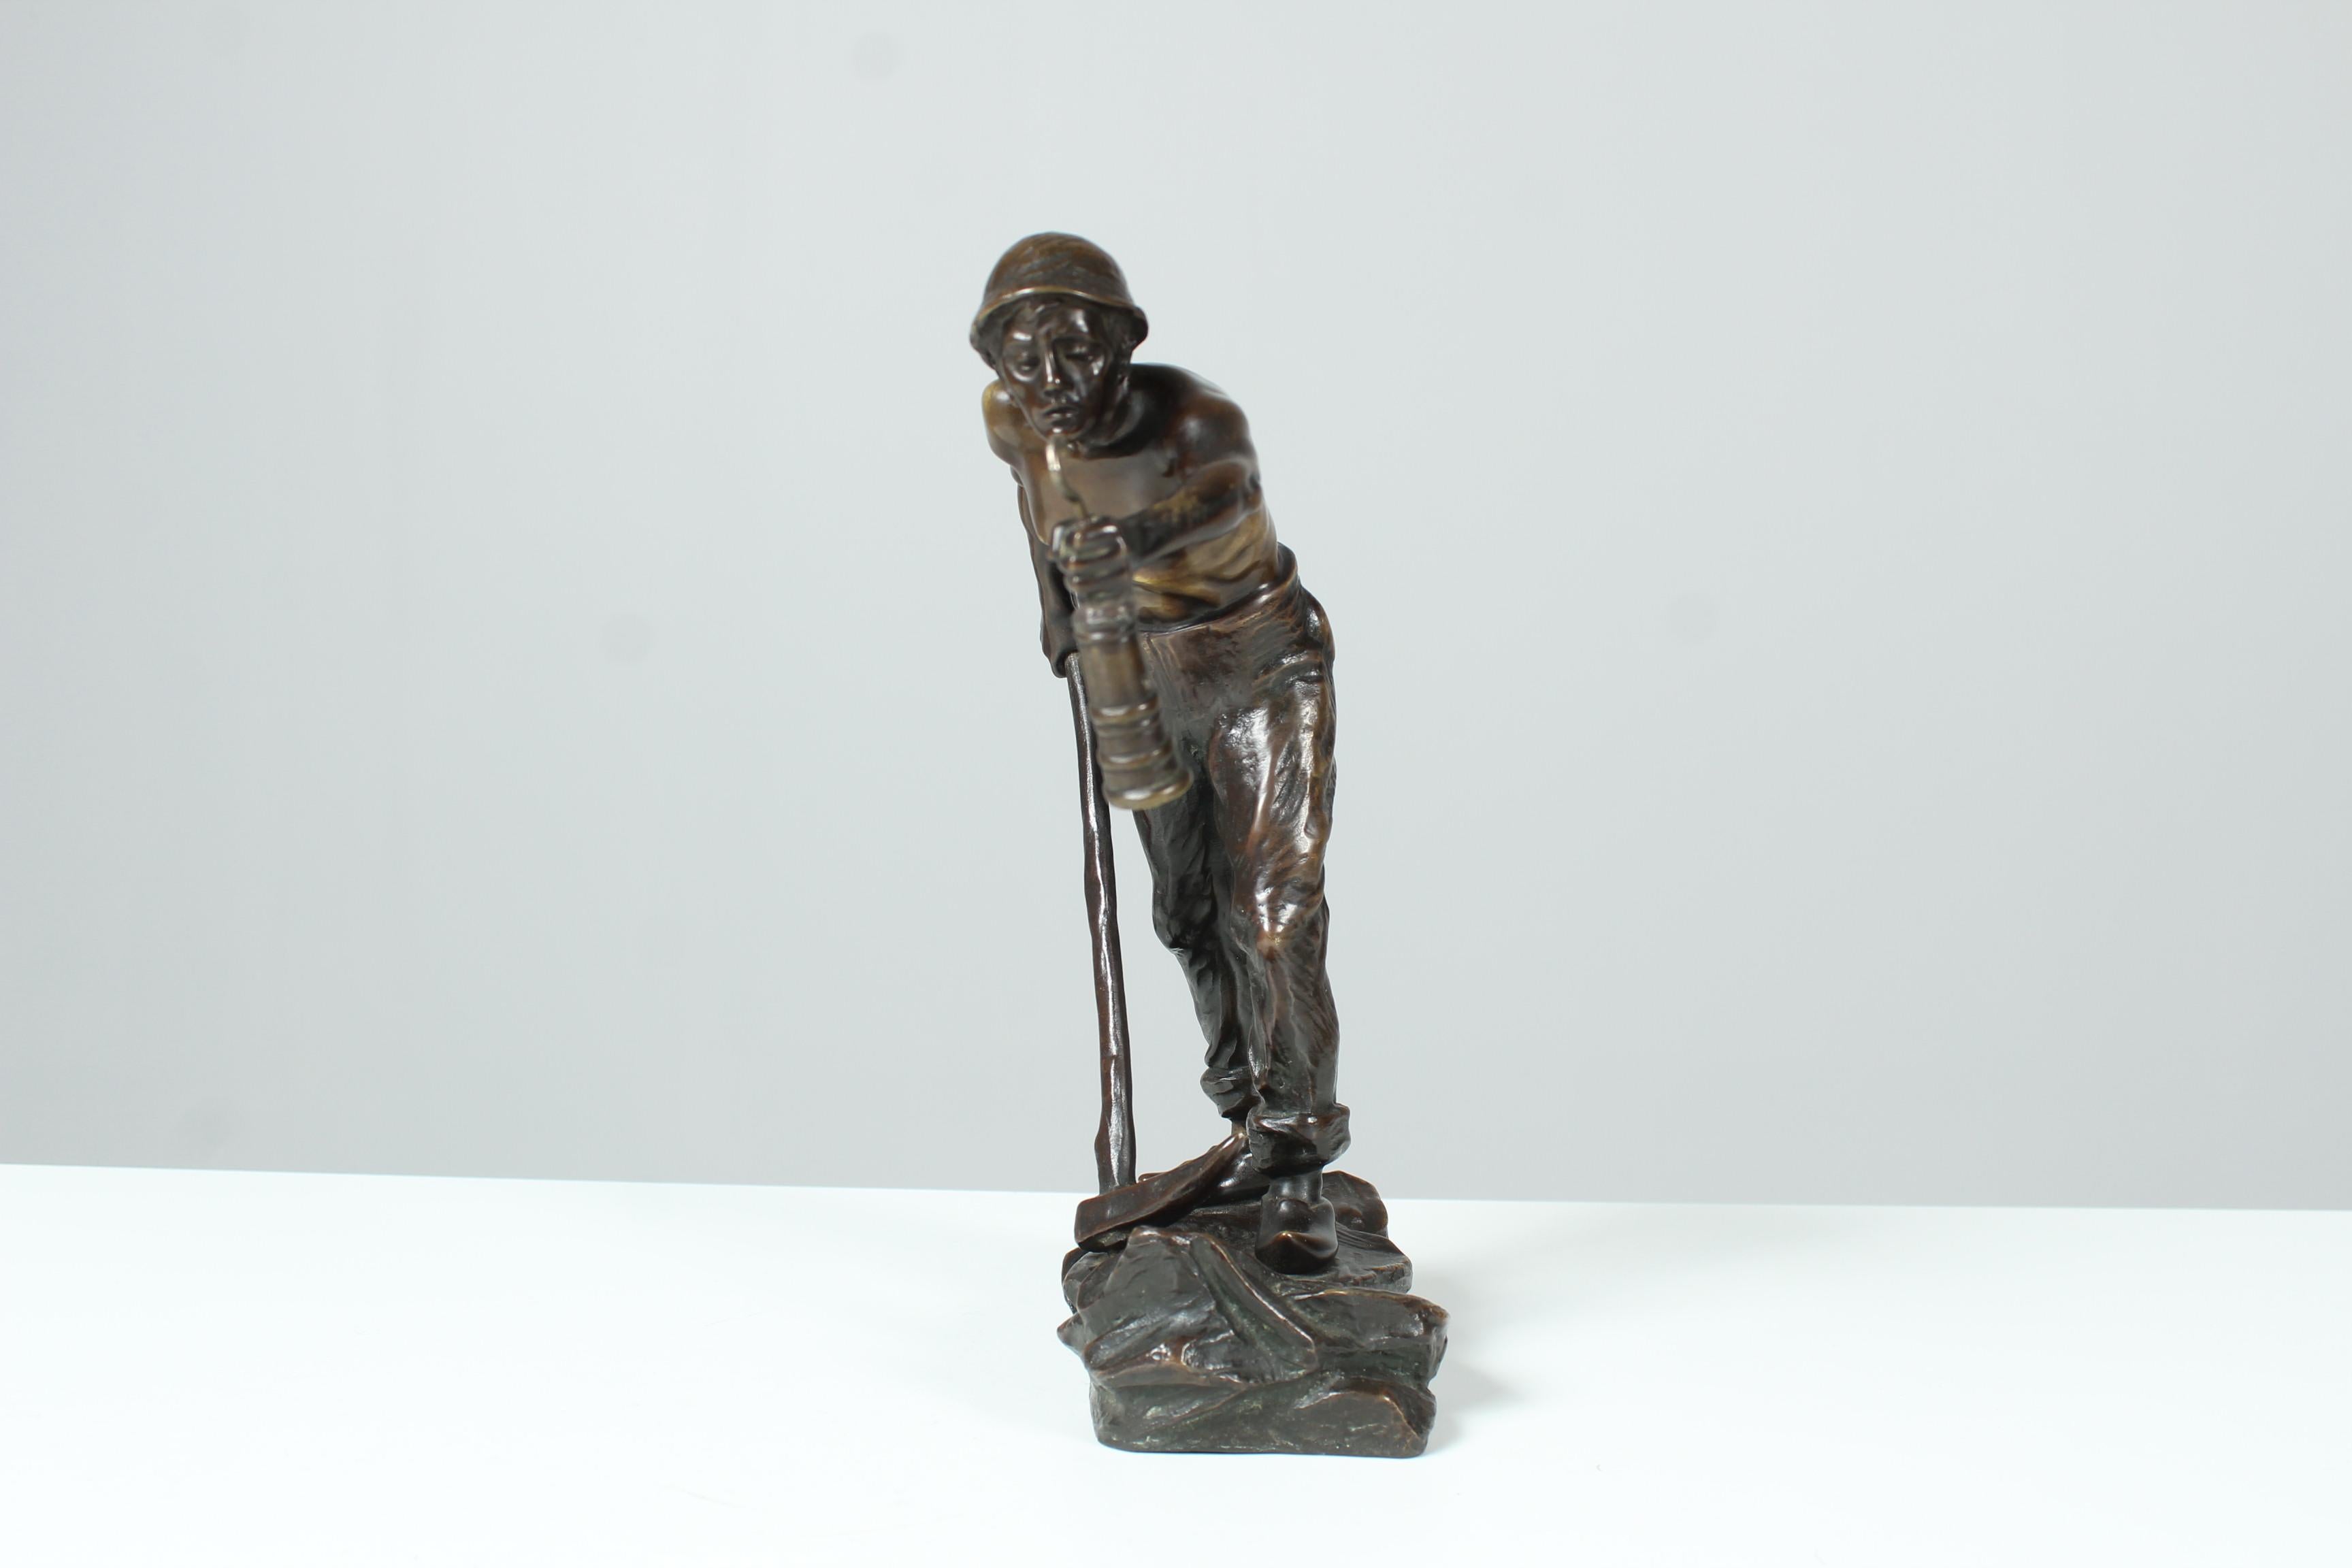 German Bronze Sculpture, Signed By The Artist 